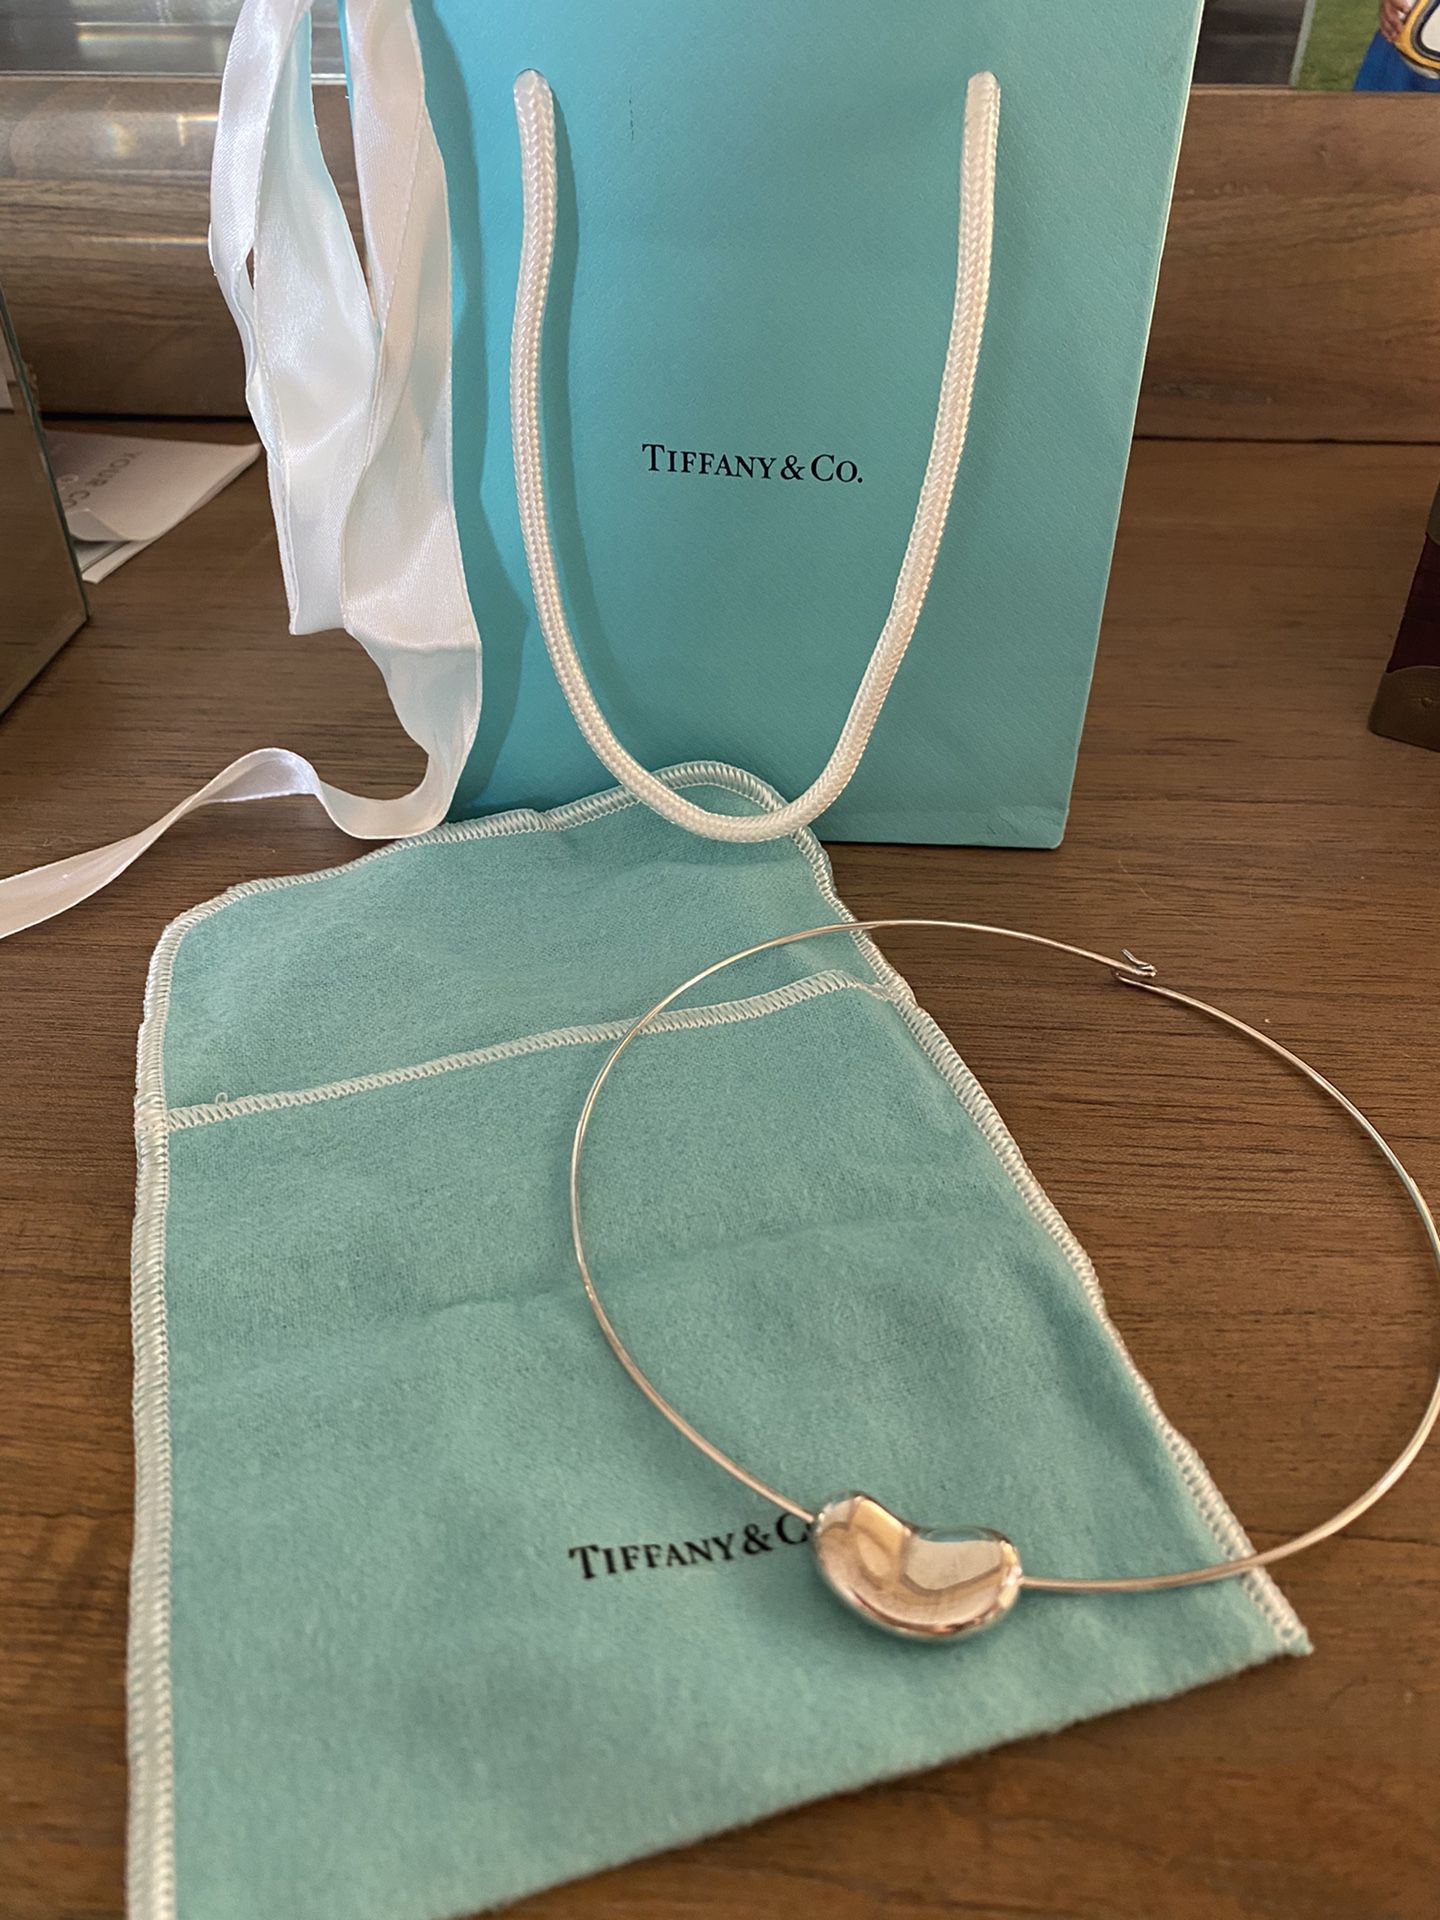 Tiffany and co bean neckless